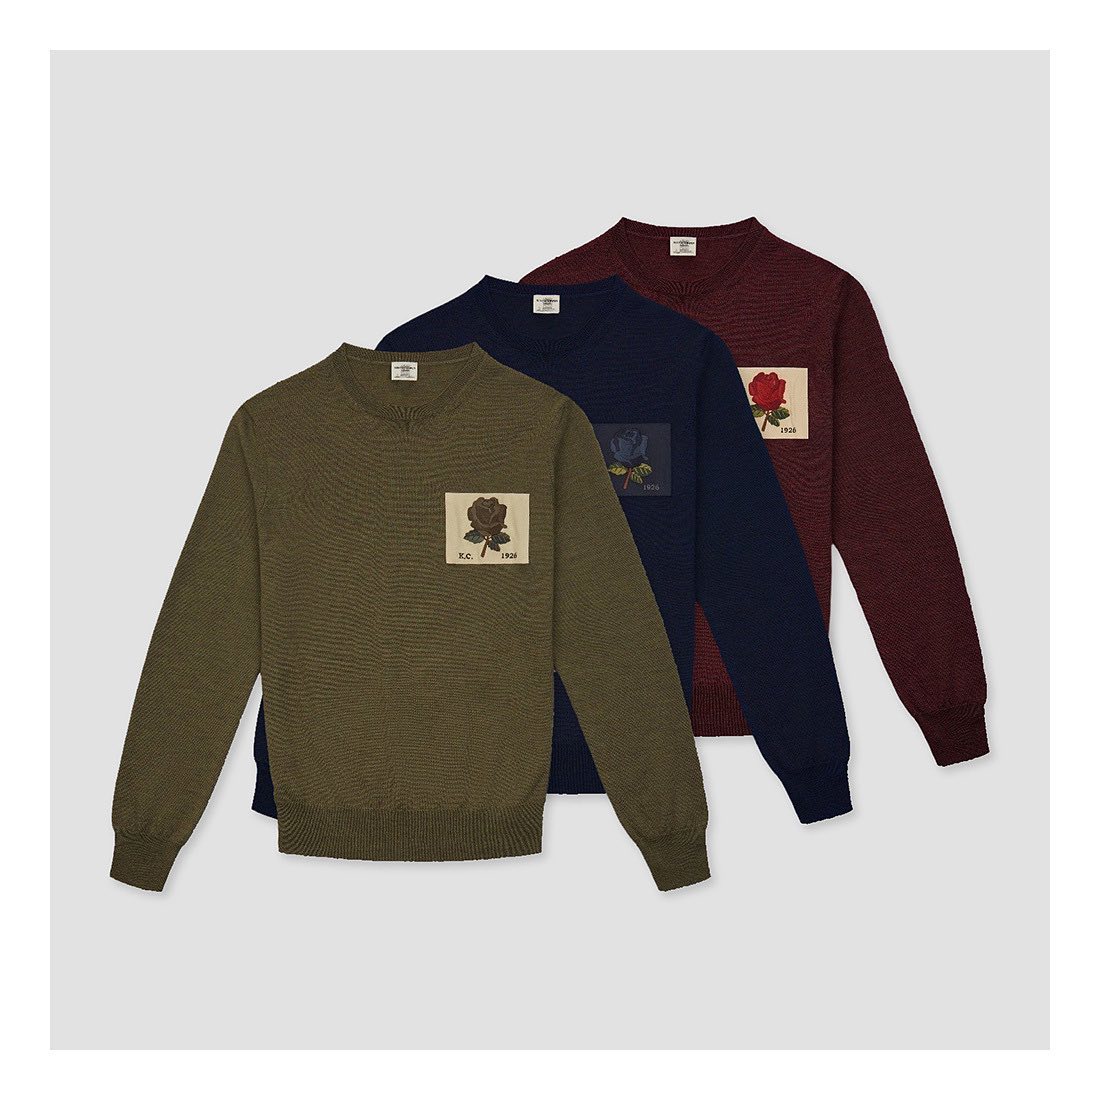 Our soft merino crewnecks are knitted in Italy with a regular fit, and finished with our iconic tonal rose patch.